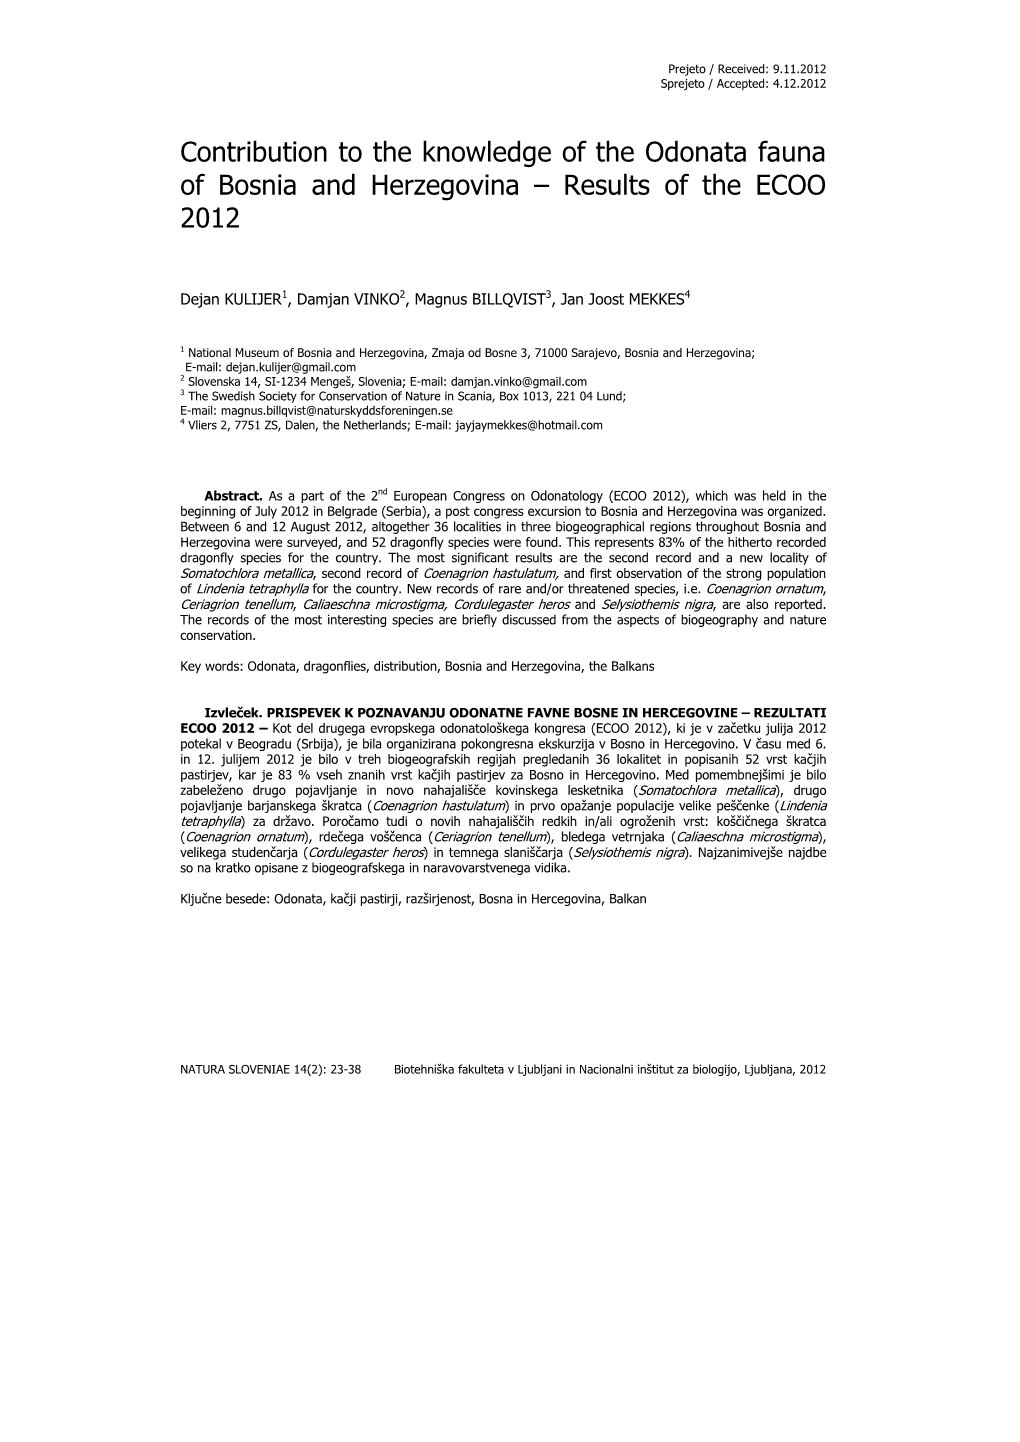 Contribution to the Knowledge of the Odonata Fauna of Bosnia and Herzegovina – Results of the ECOO 2012